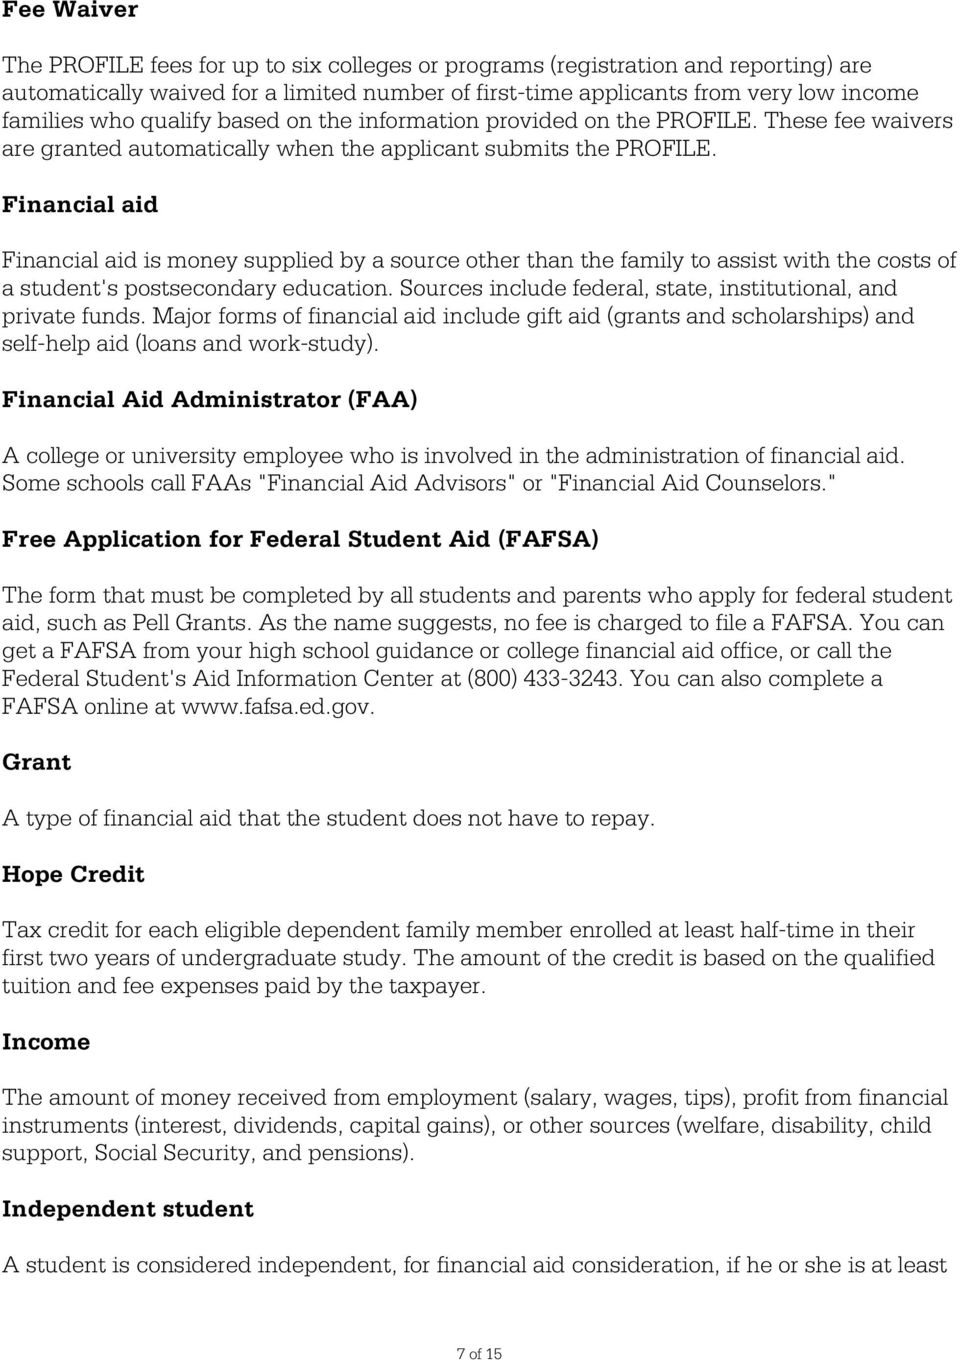 Financial aid Financial aid is money supplied by a source other than the family to assist with the costs of a student's postsecondary education.